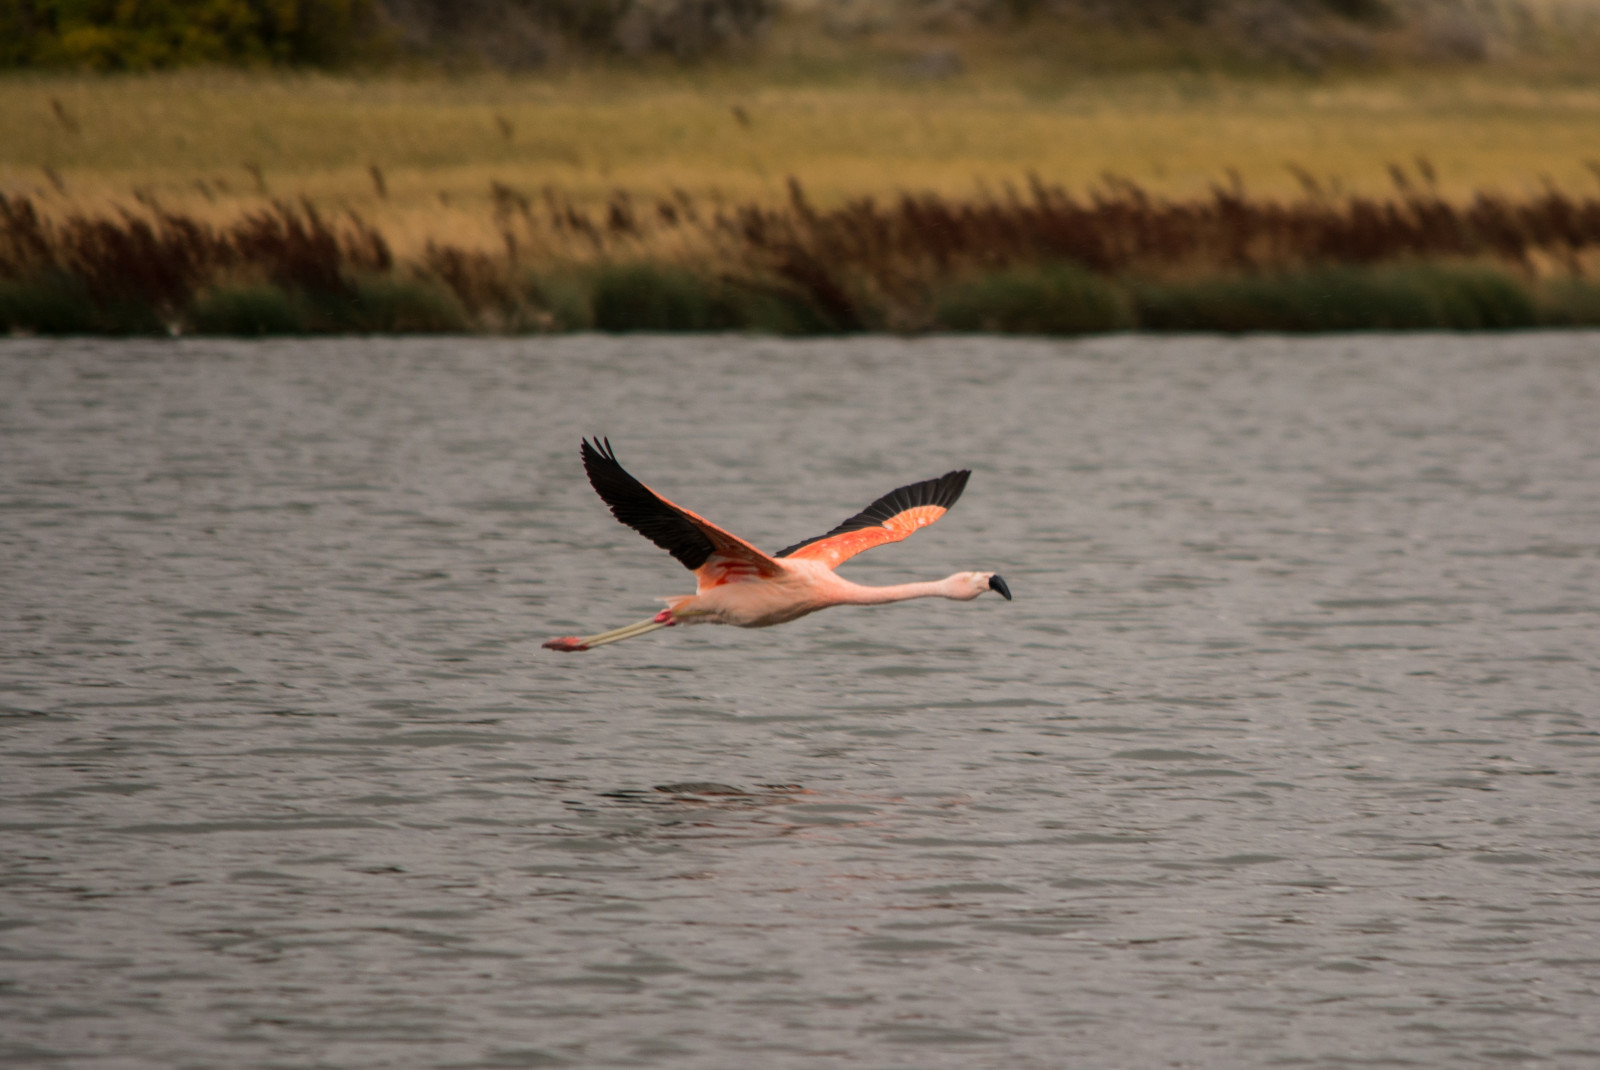 Laguna Nimez bird sanctuary in El Calafate, Argenina with a pink and black-winged flamingo flying over the dark blue water with brown and green tall grass lining the lake water.